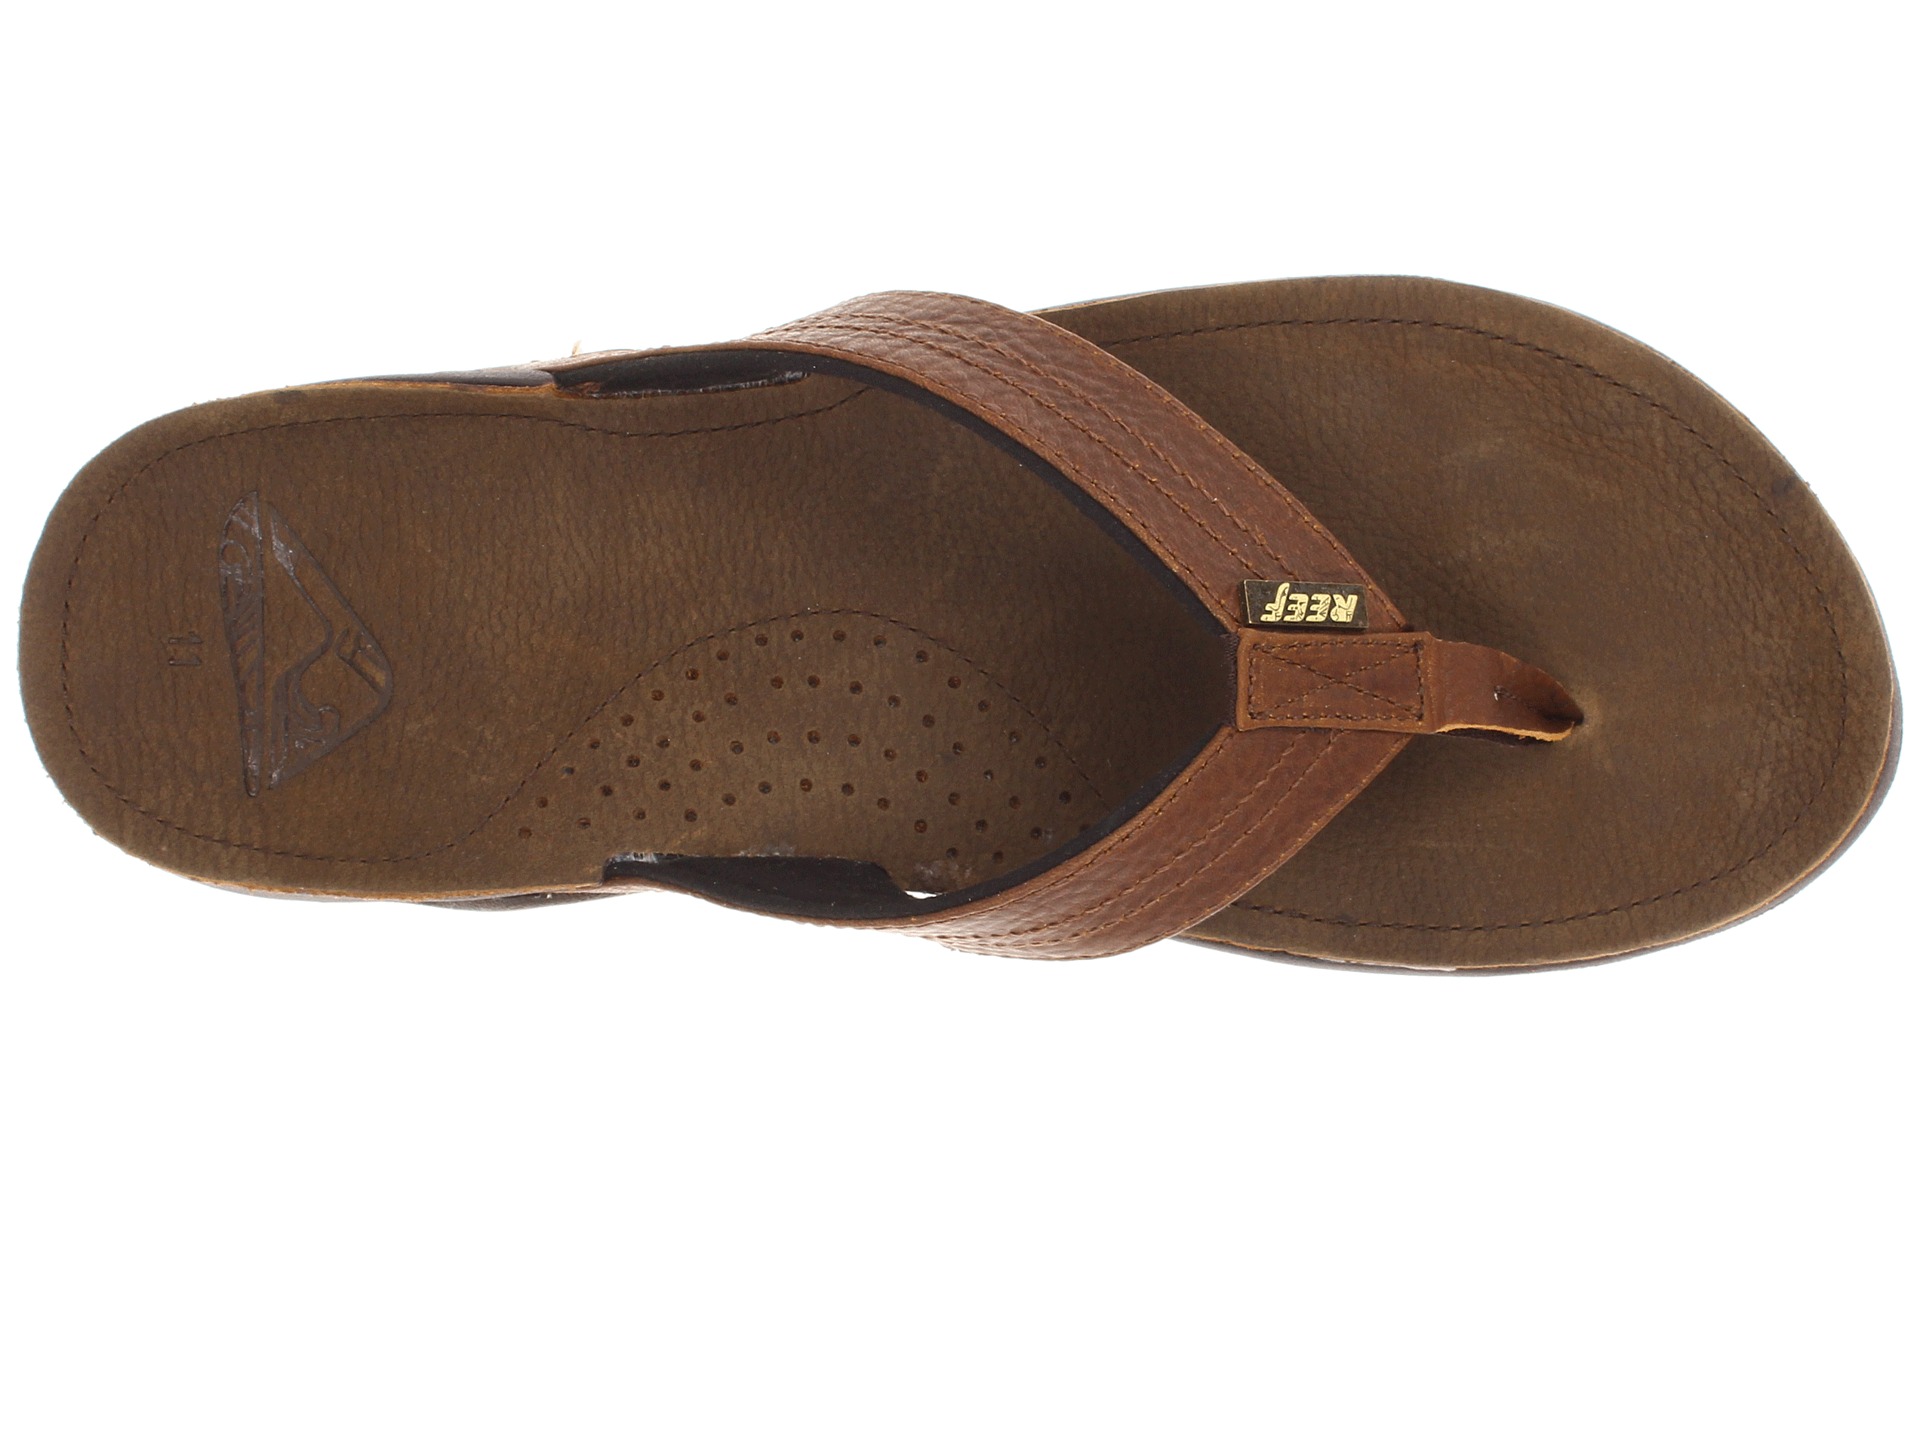 Reef Reef J Bay, Shoes | Shipped Free at Zappos